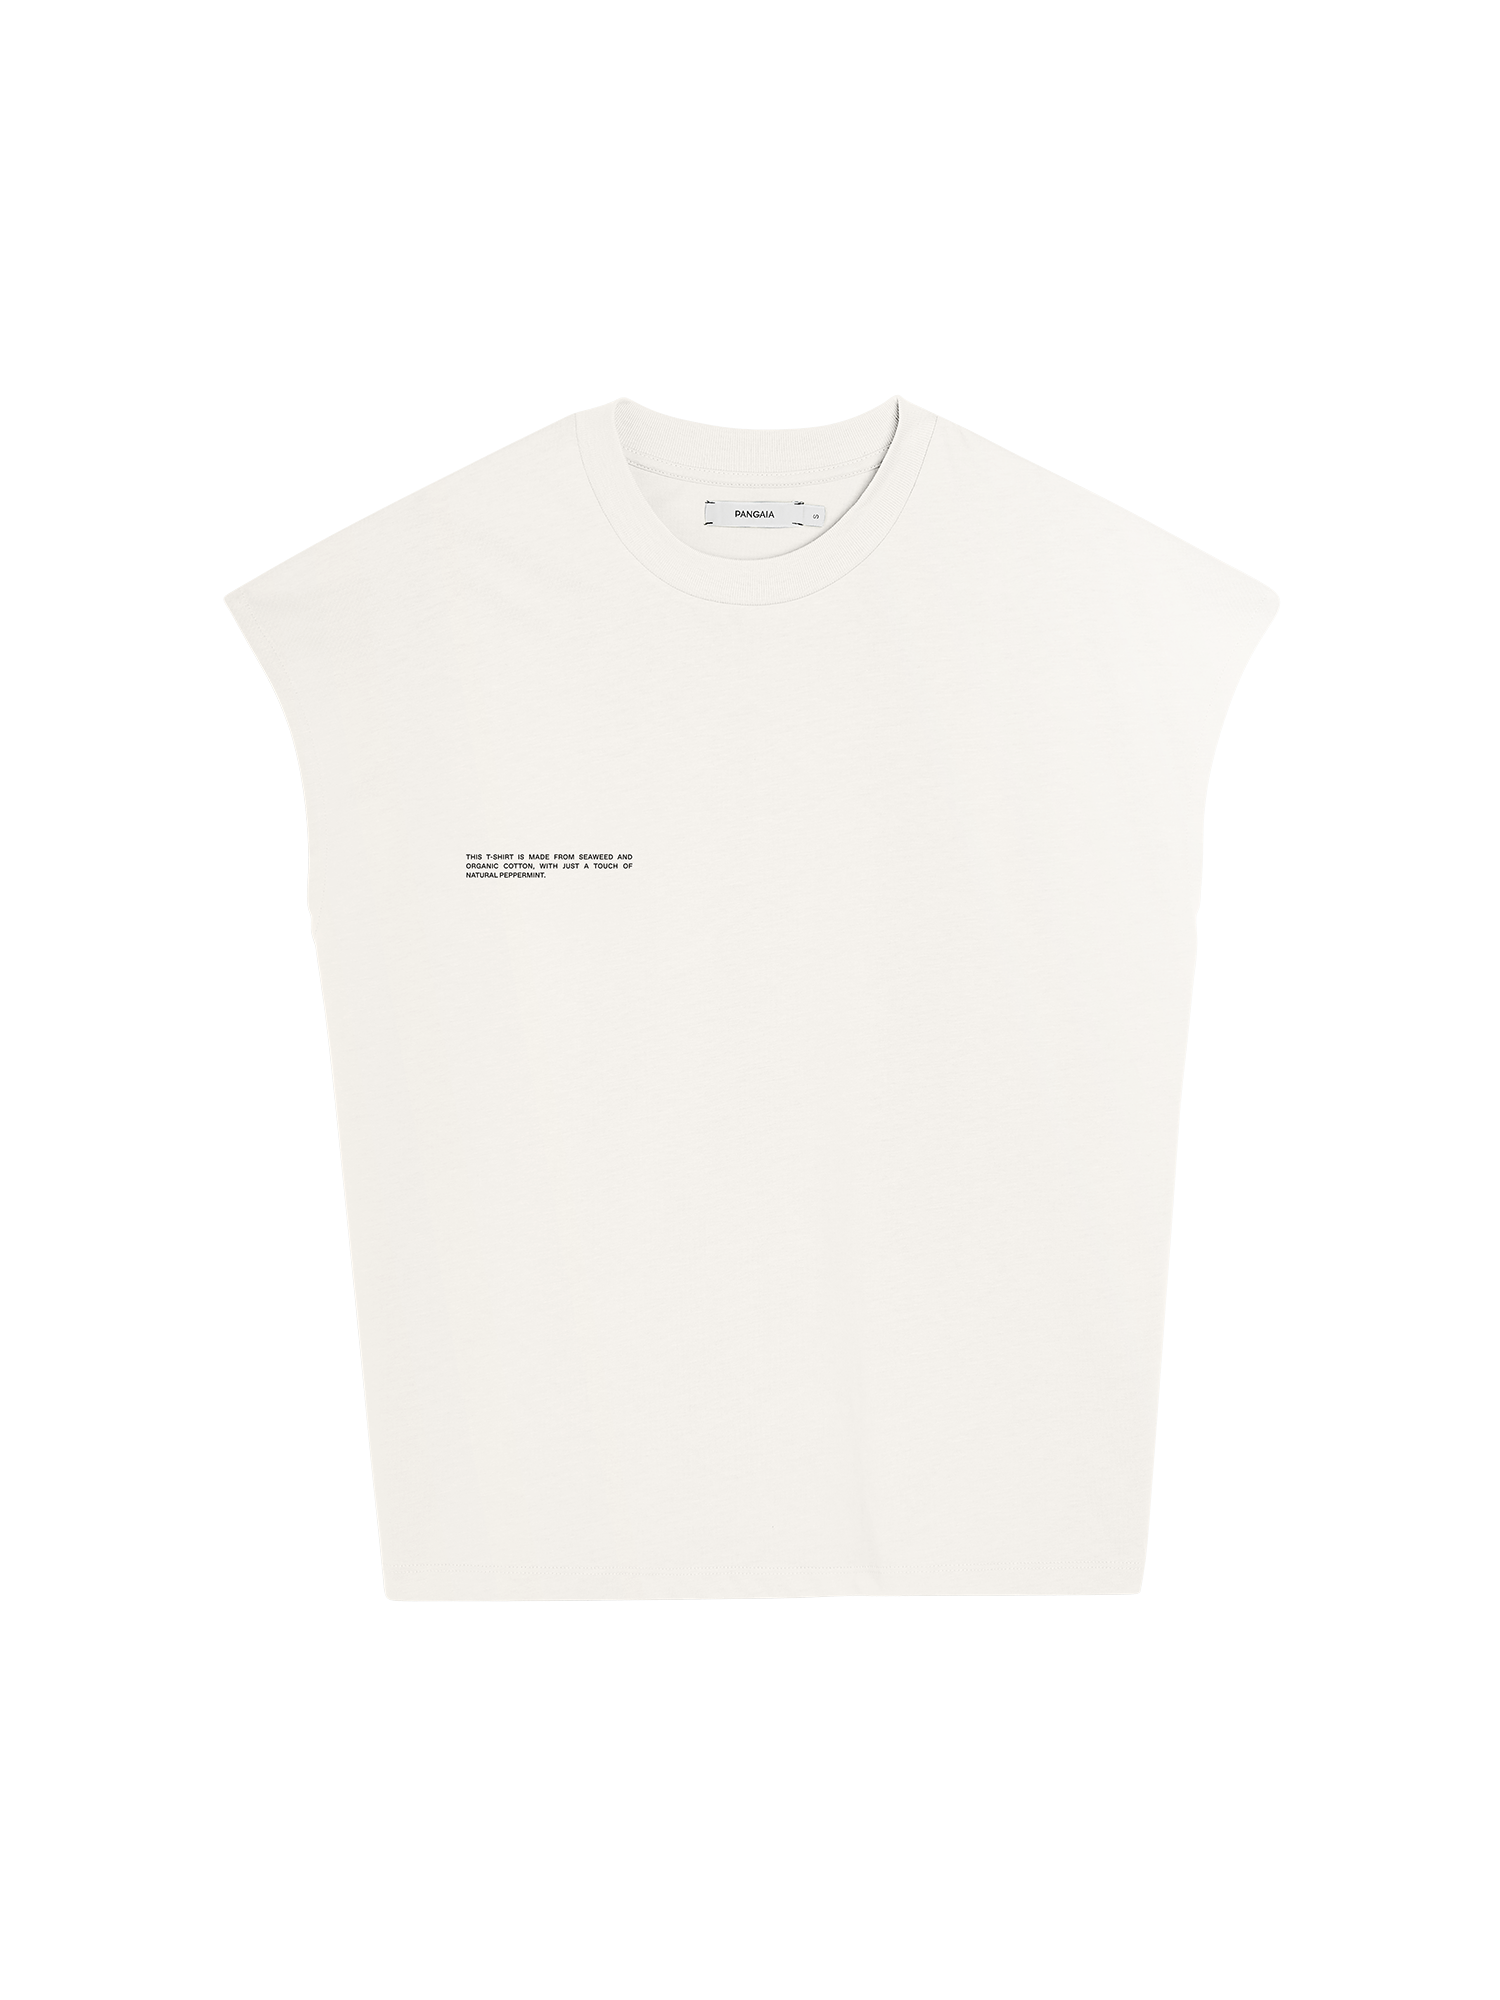 https://storage.googleapis.com/download/storage/v1/b/whering.appspot.com/o/marketplace_product_images%2Fpangaia-organic-cotton-cropped-shoulder-tshirt-with-cfiber-coreoffwhite-ecru-qi6swurK8UD1kzXRRdhvGy.png?generation=1690434046280163&alt=media